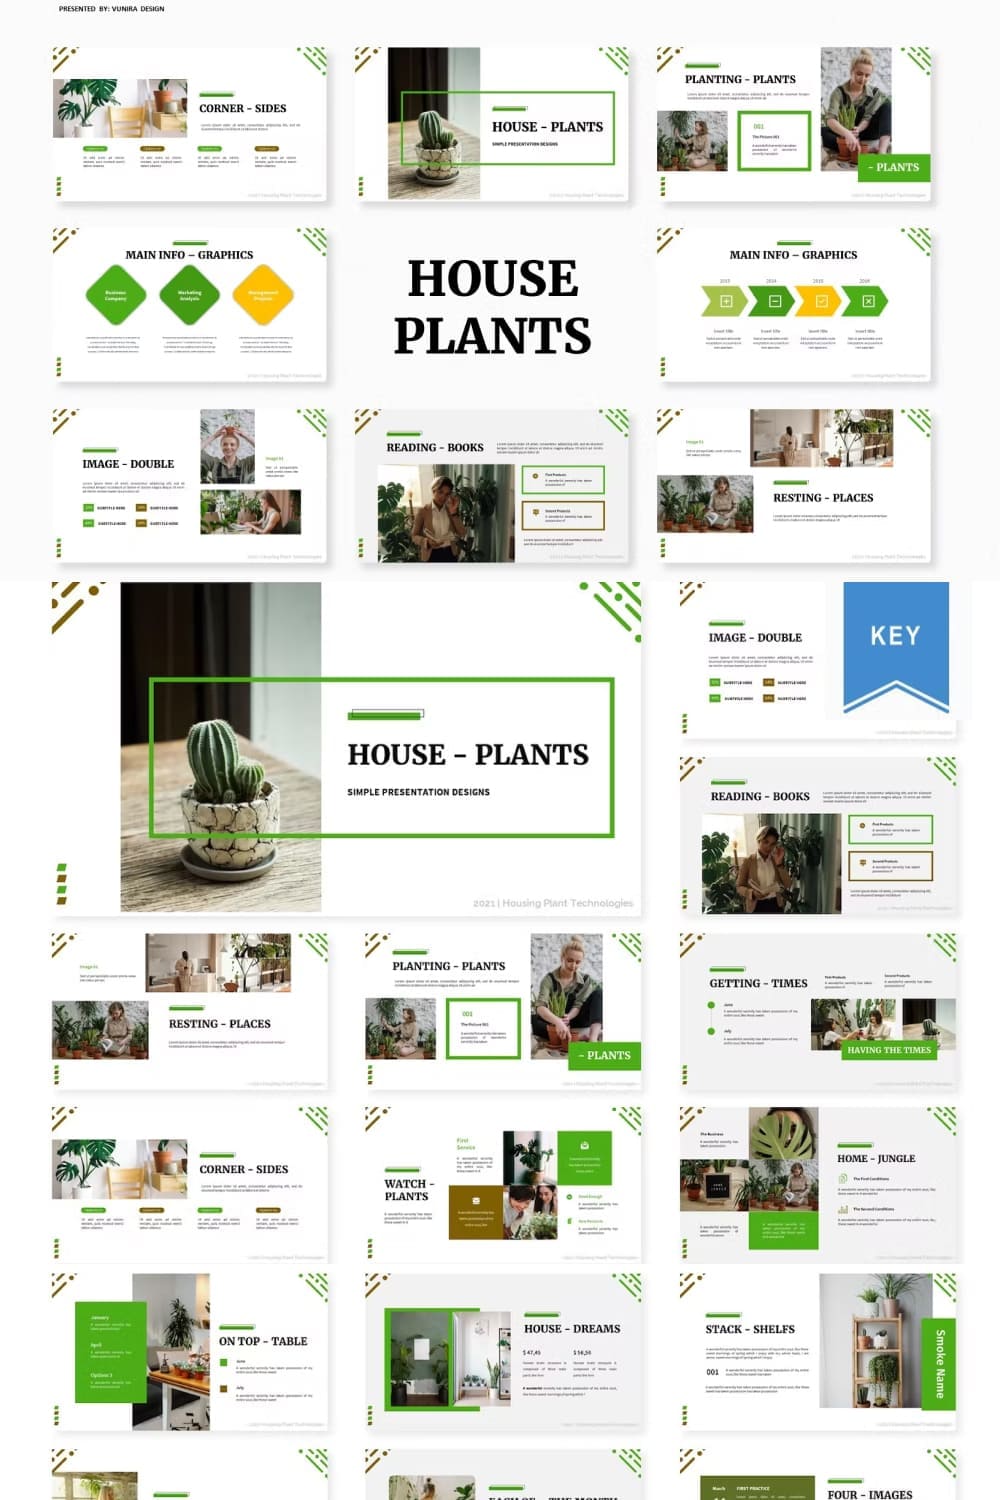 House plants decorate cabinets, improve the atmosphere, etc.